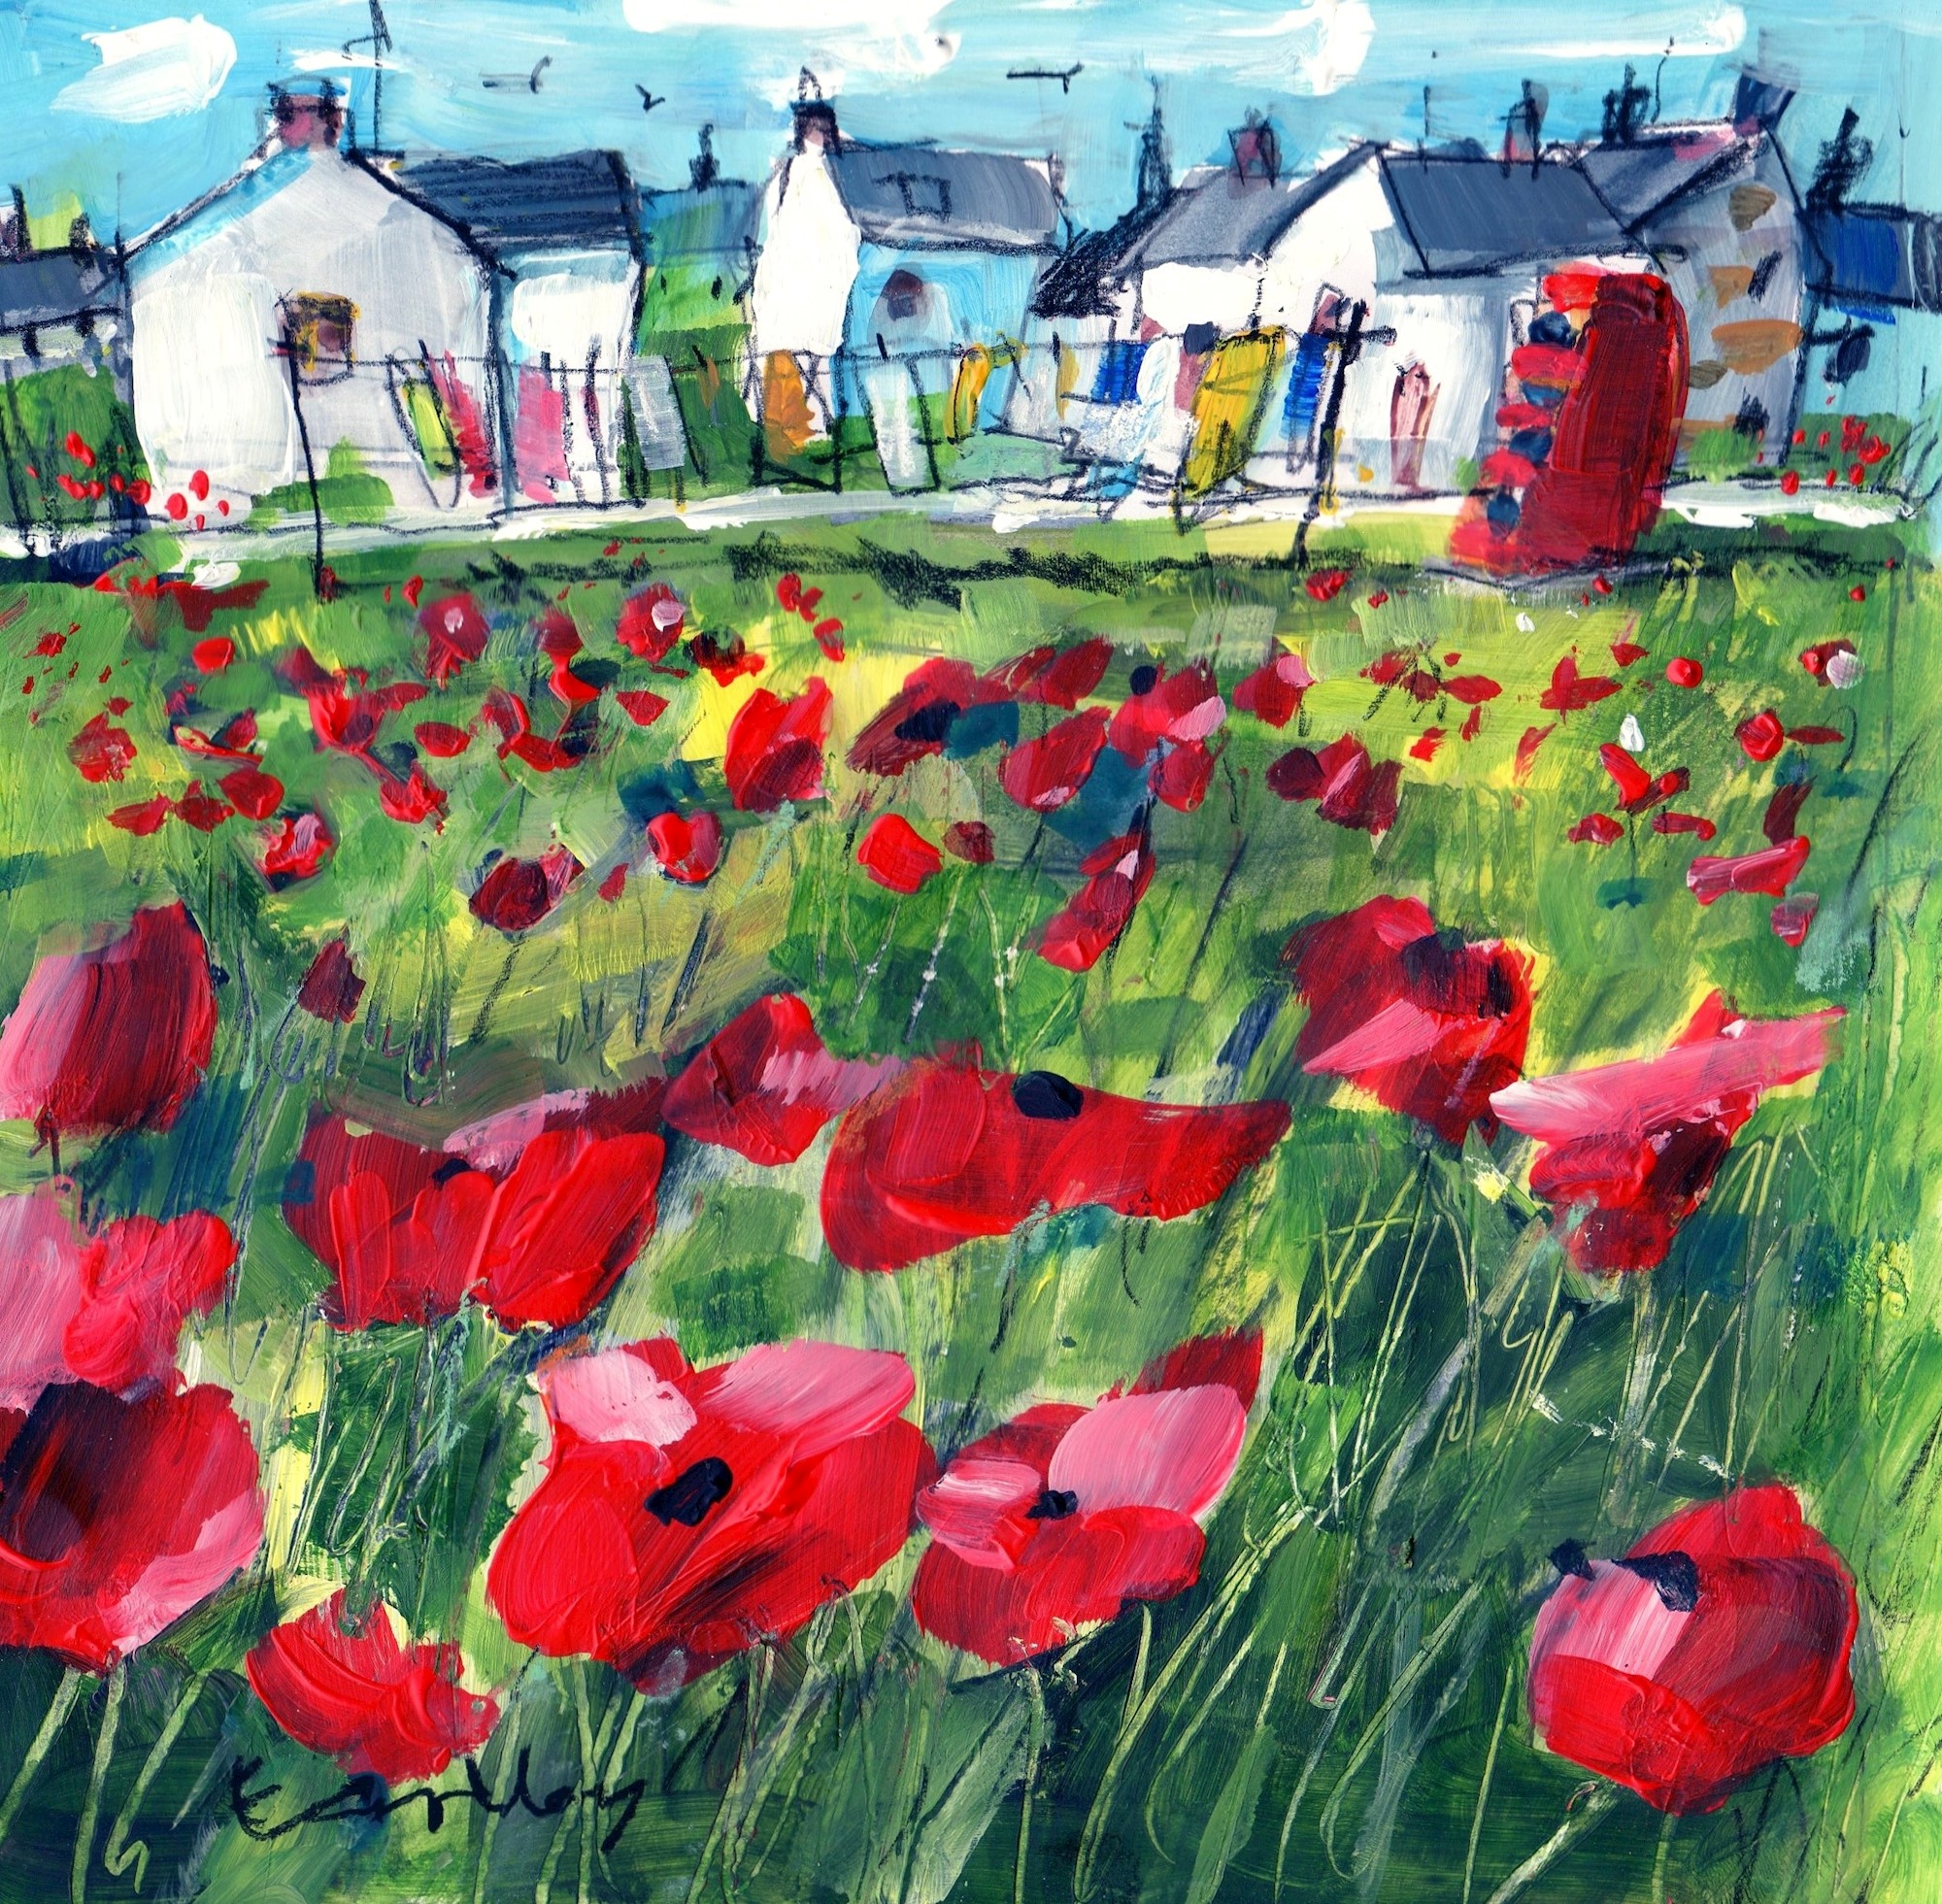 'Poppies, Seatown, Lossiemouth' by artist Ron Eardley